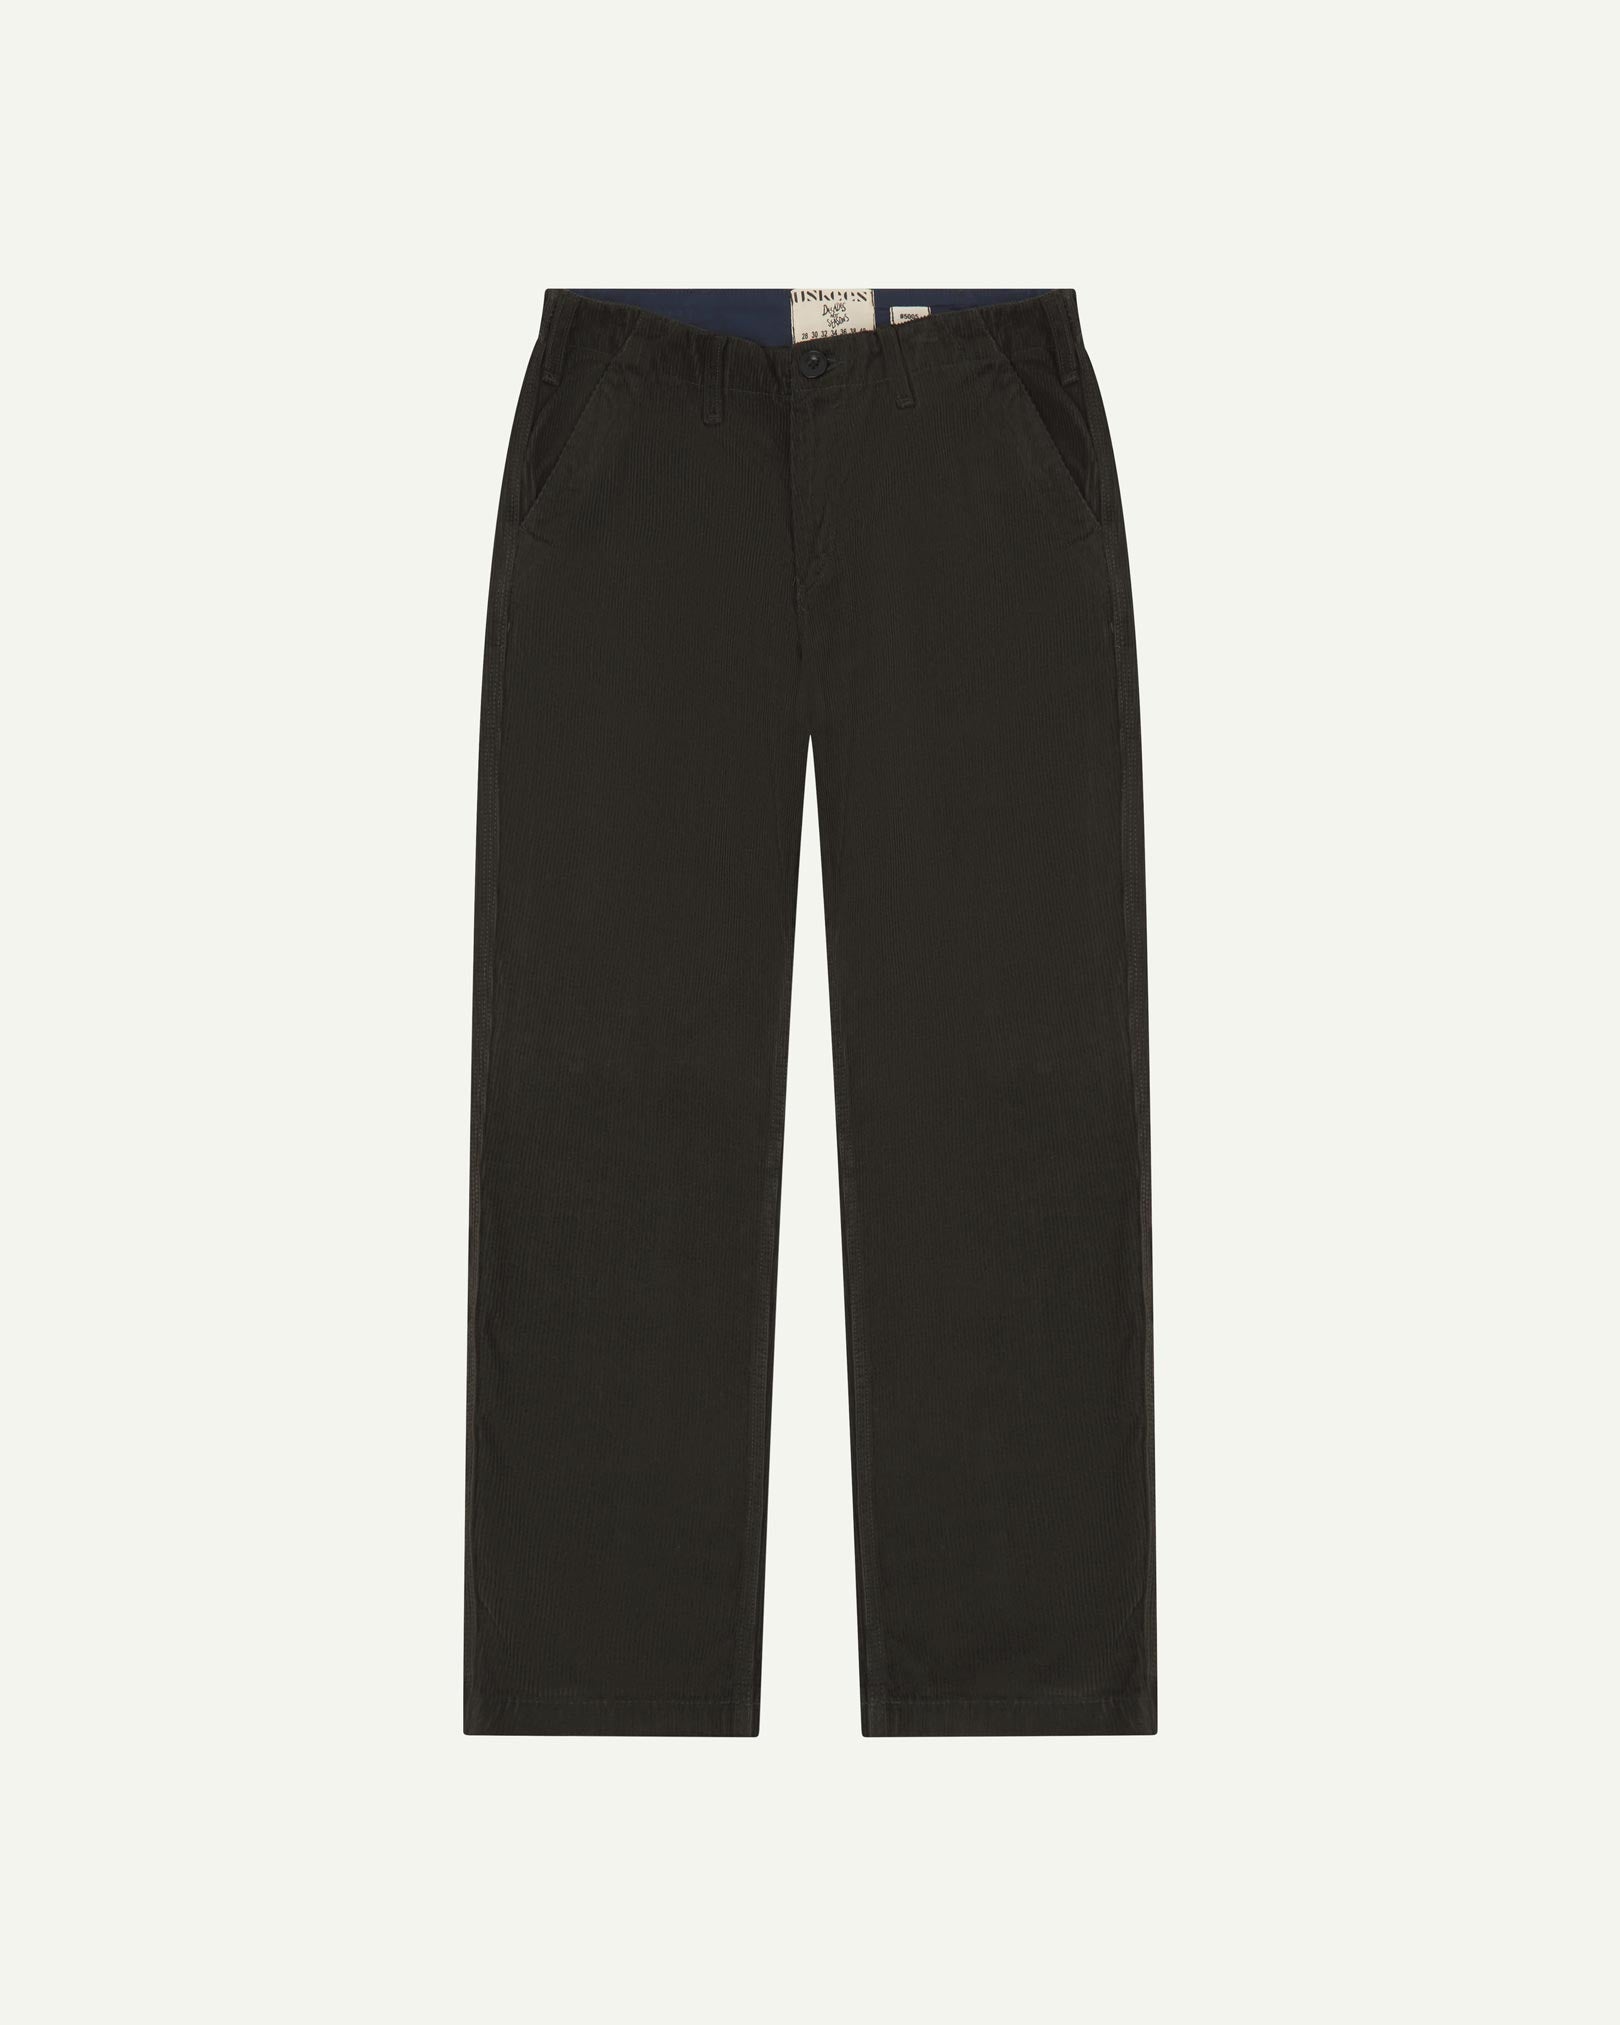 Front flat view of 5005 Uskees men's organic corduroy 'faded black' casual trousers with view of YKK zip fly and Corozo buttons.